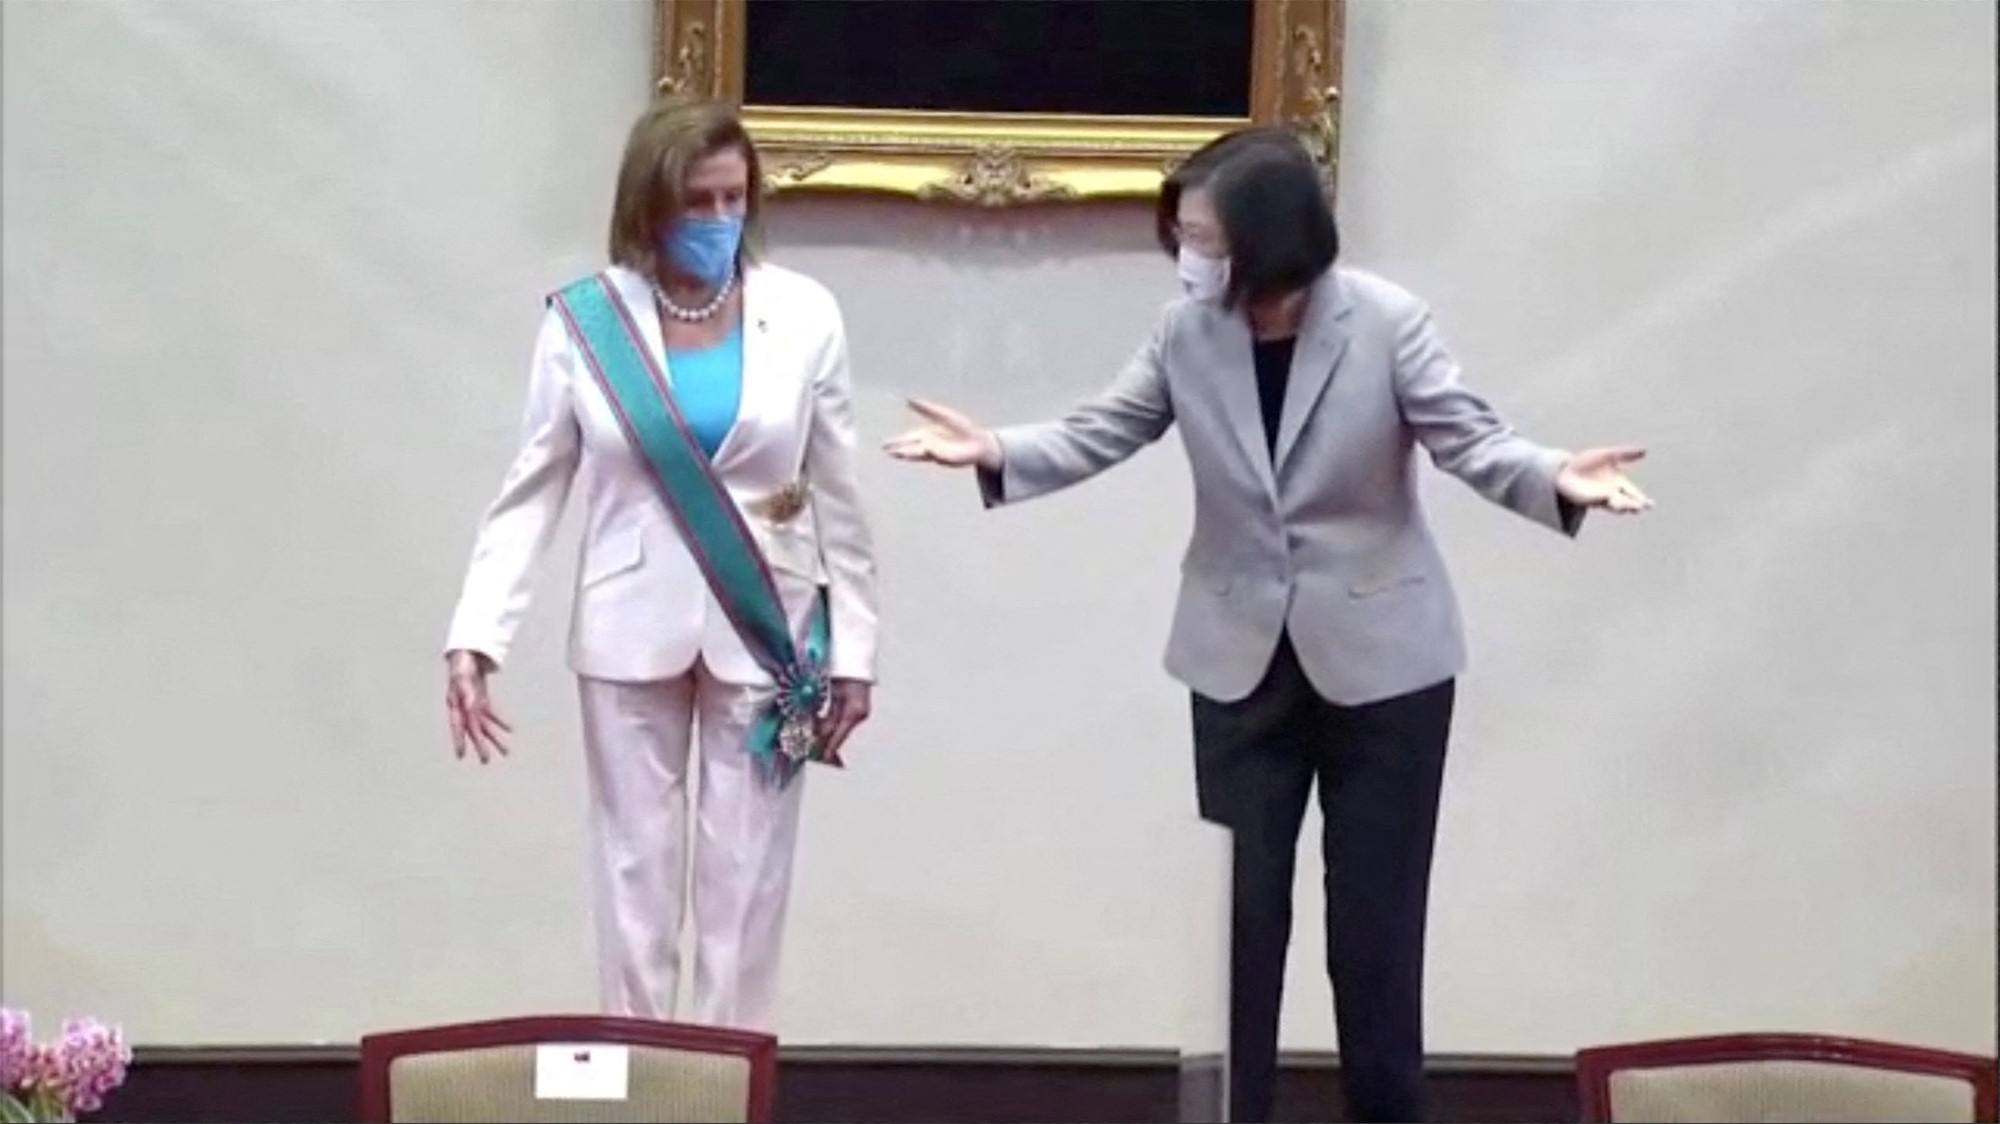 A woman wearing a white suit and aqua cash stands next to a woman wearing a grey blazer gesturing.